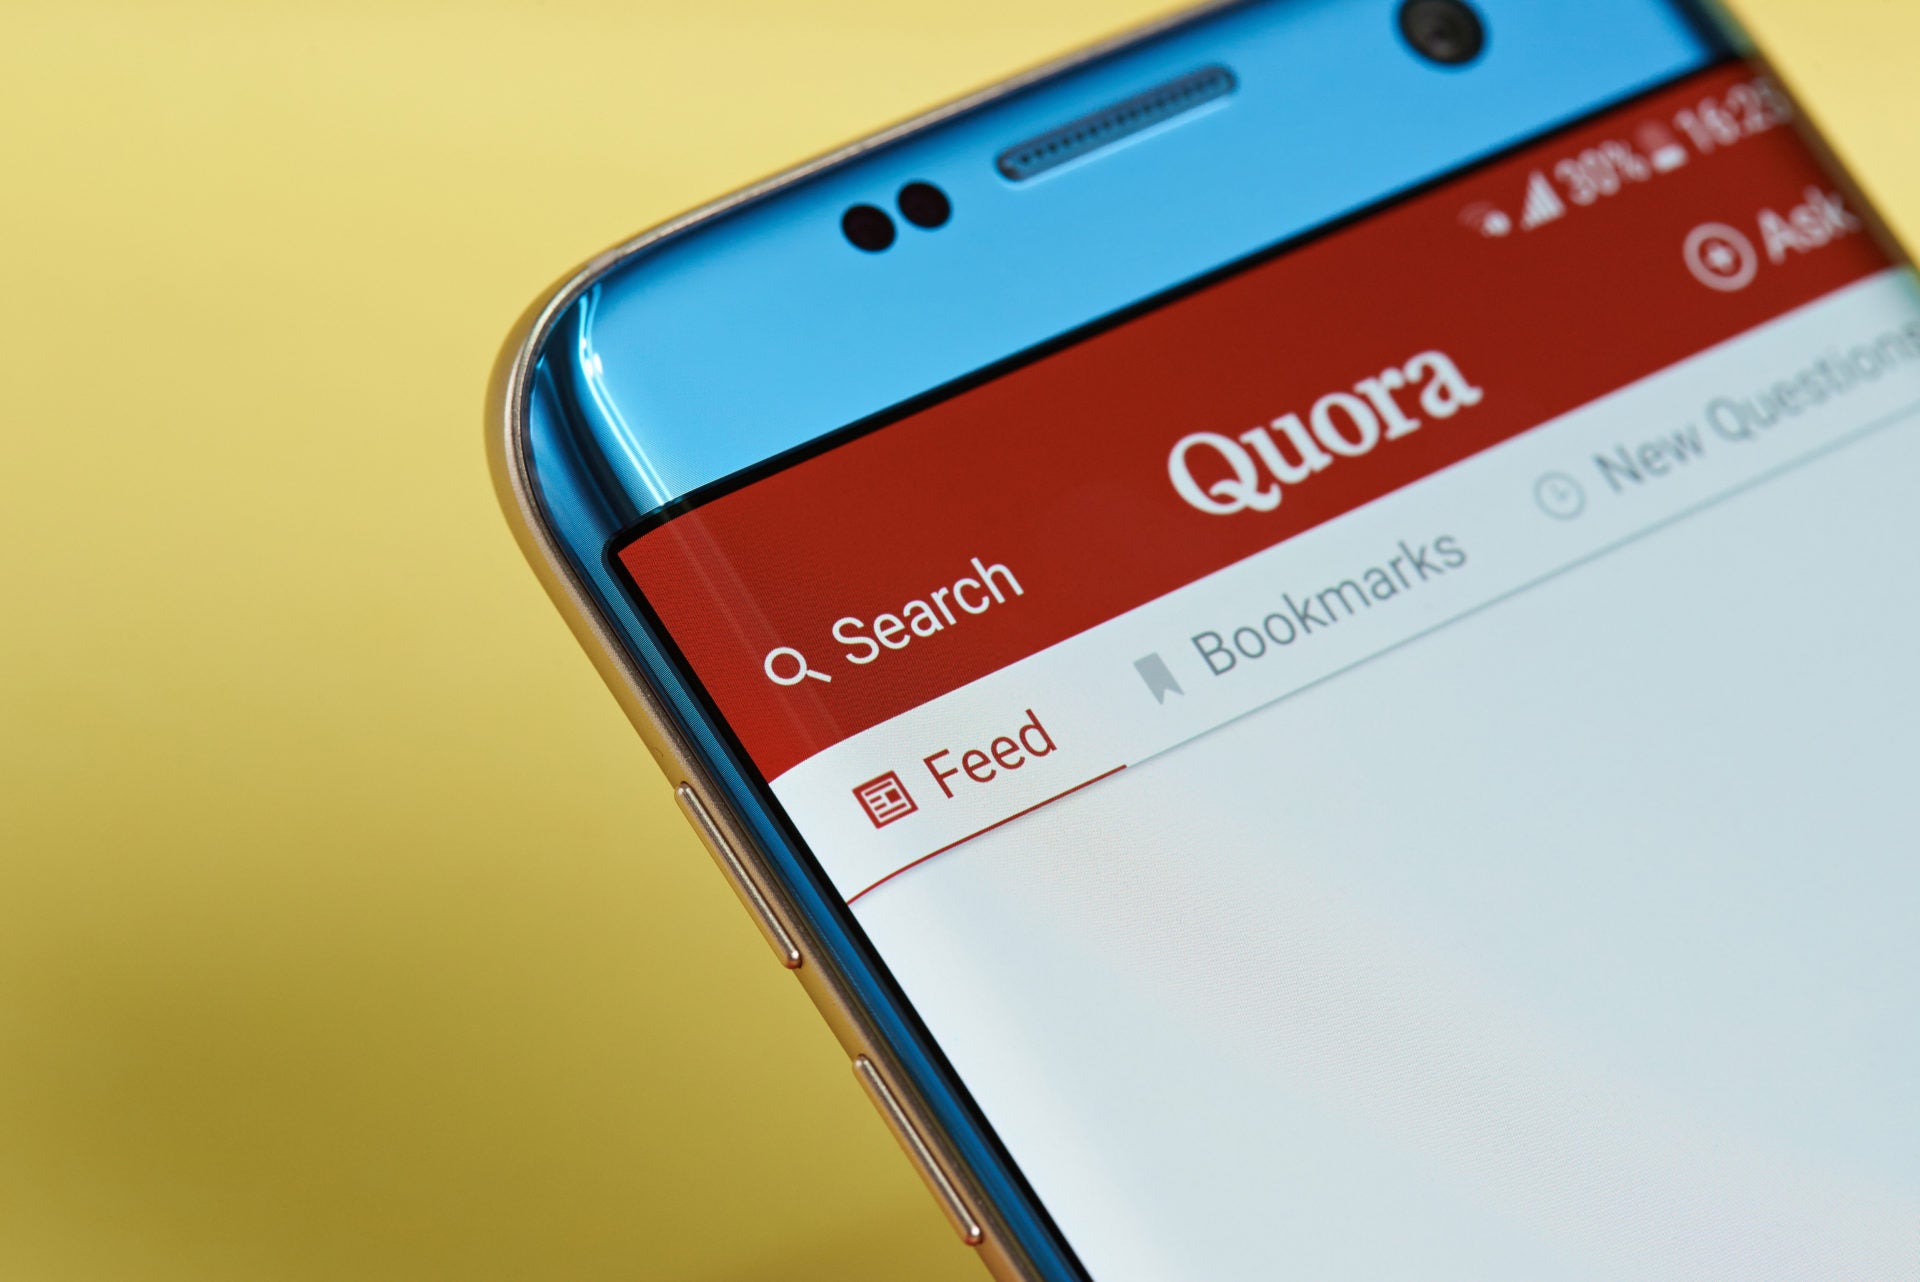 Quora hack reaction: ‘No sector is safe’ as 100m users’ data stolen